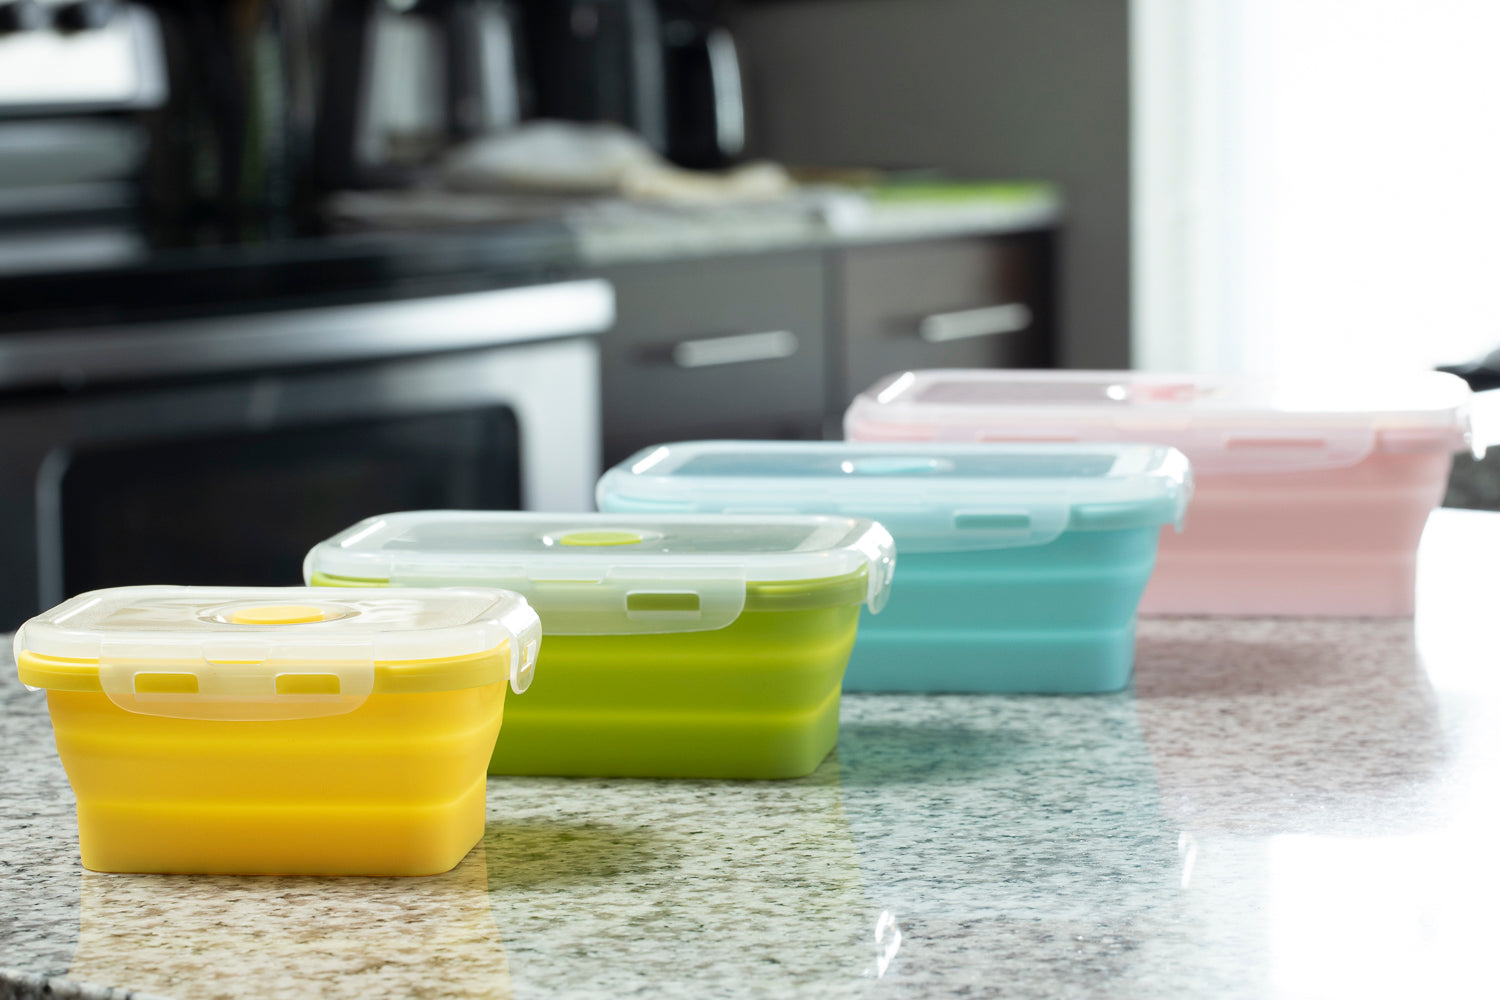 Collapsible Food Containers with Logos